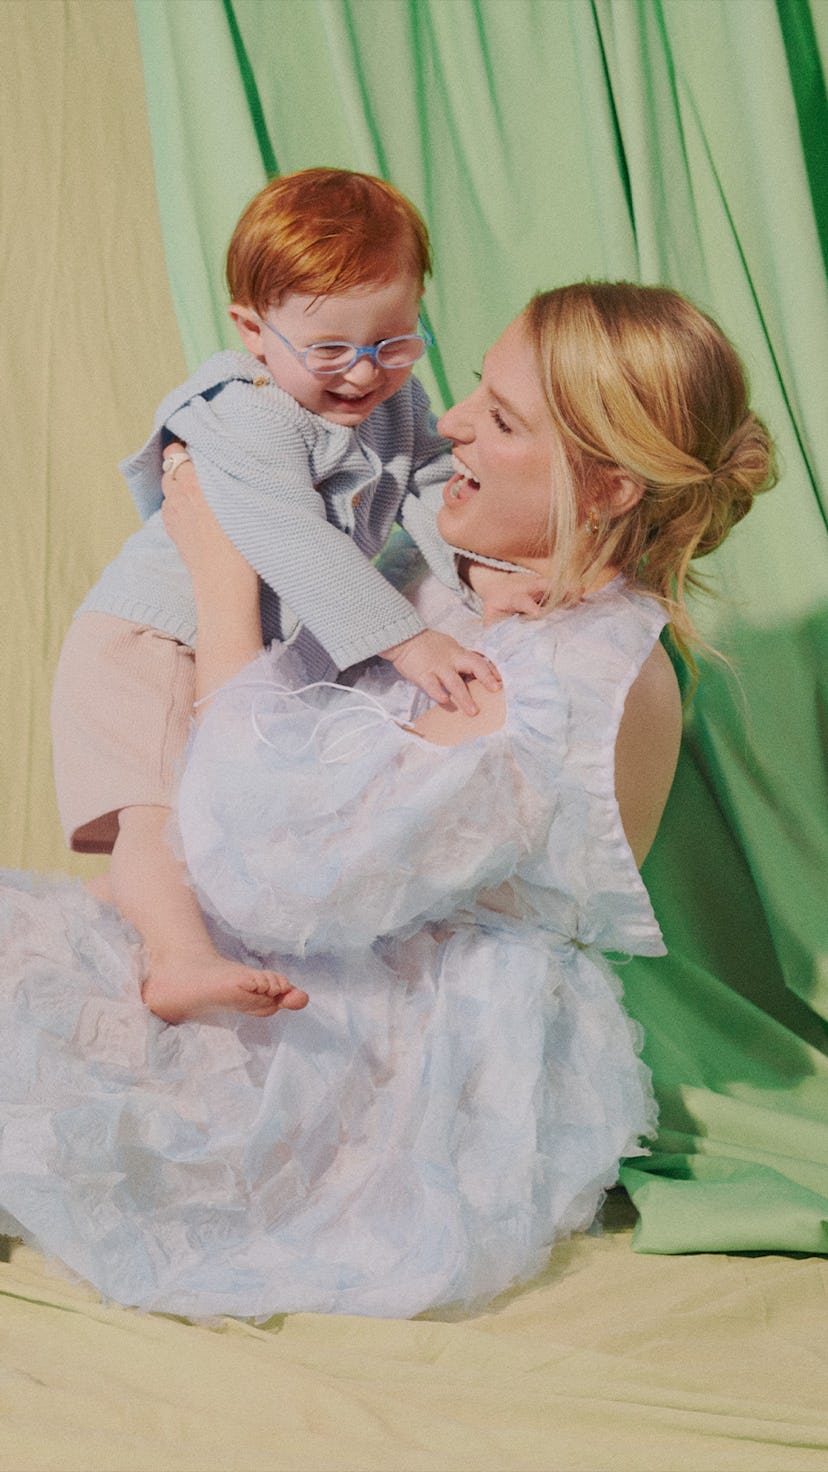 Meghan Trainor sitting on the ground in a white dress, playfully holding her son with green curtains...